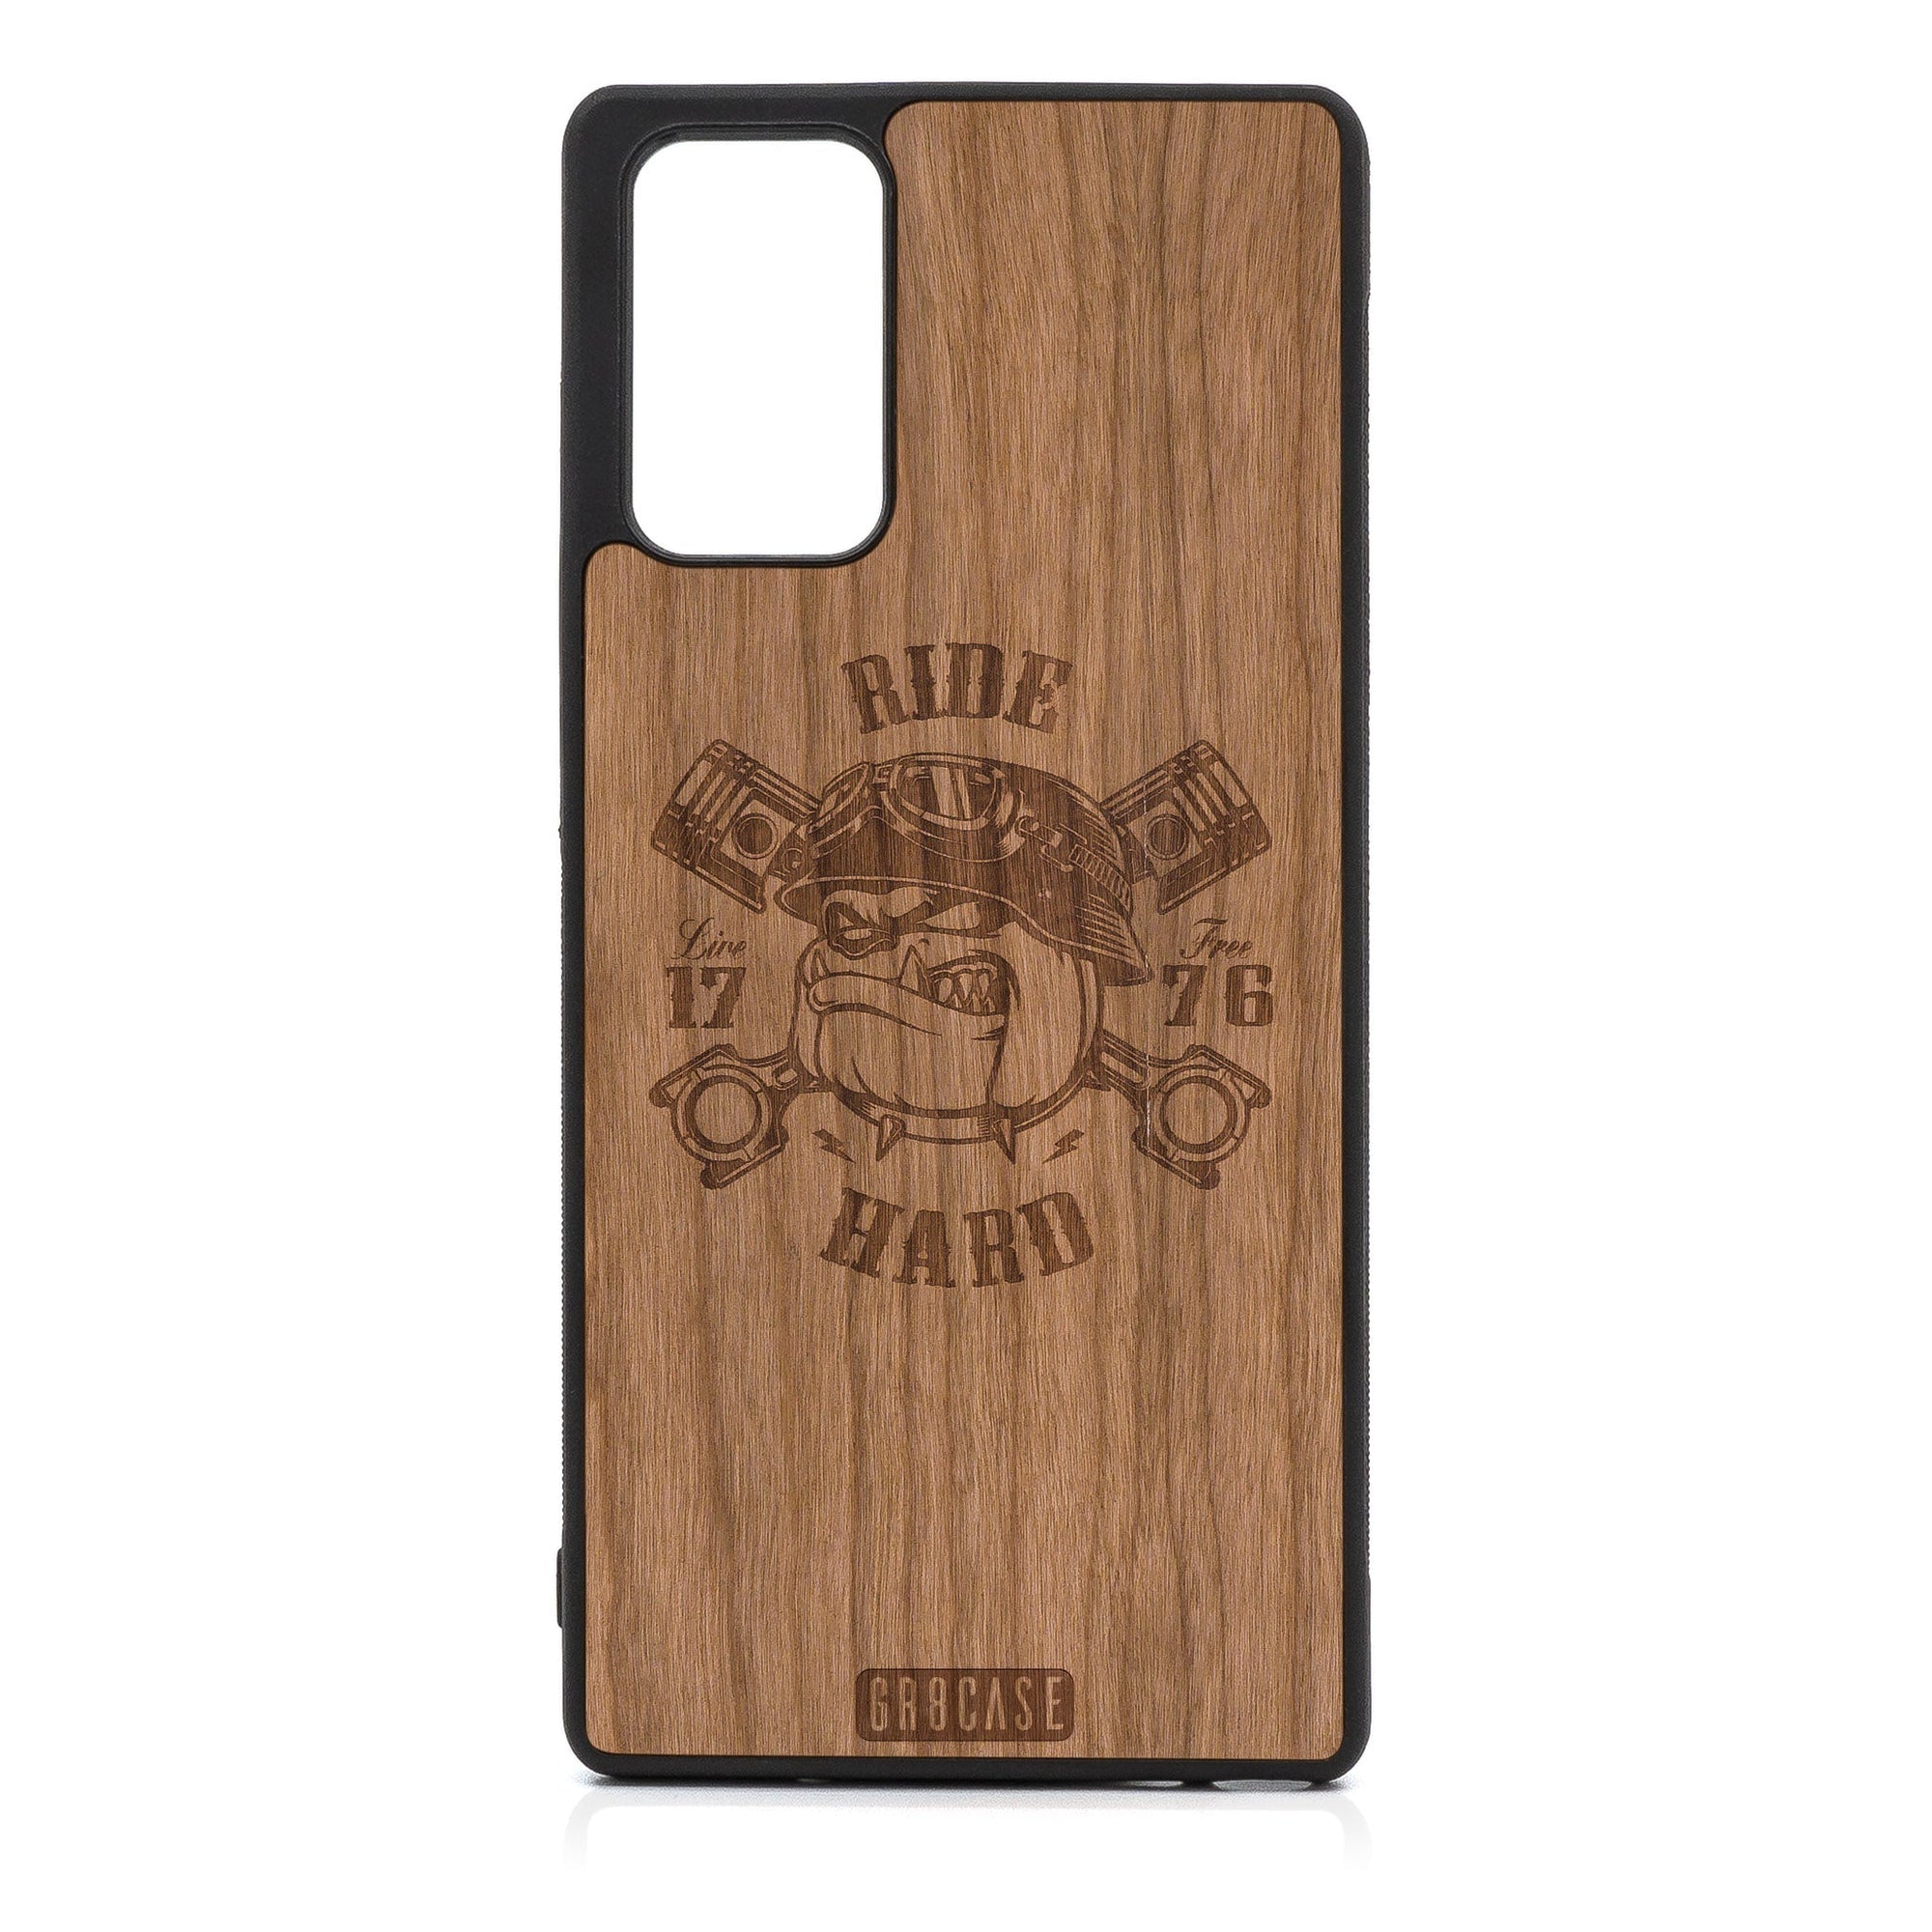 Ride Hard Live Free Design Wood Case For Samsung Galaxy A73 5G